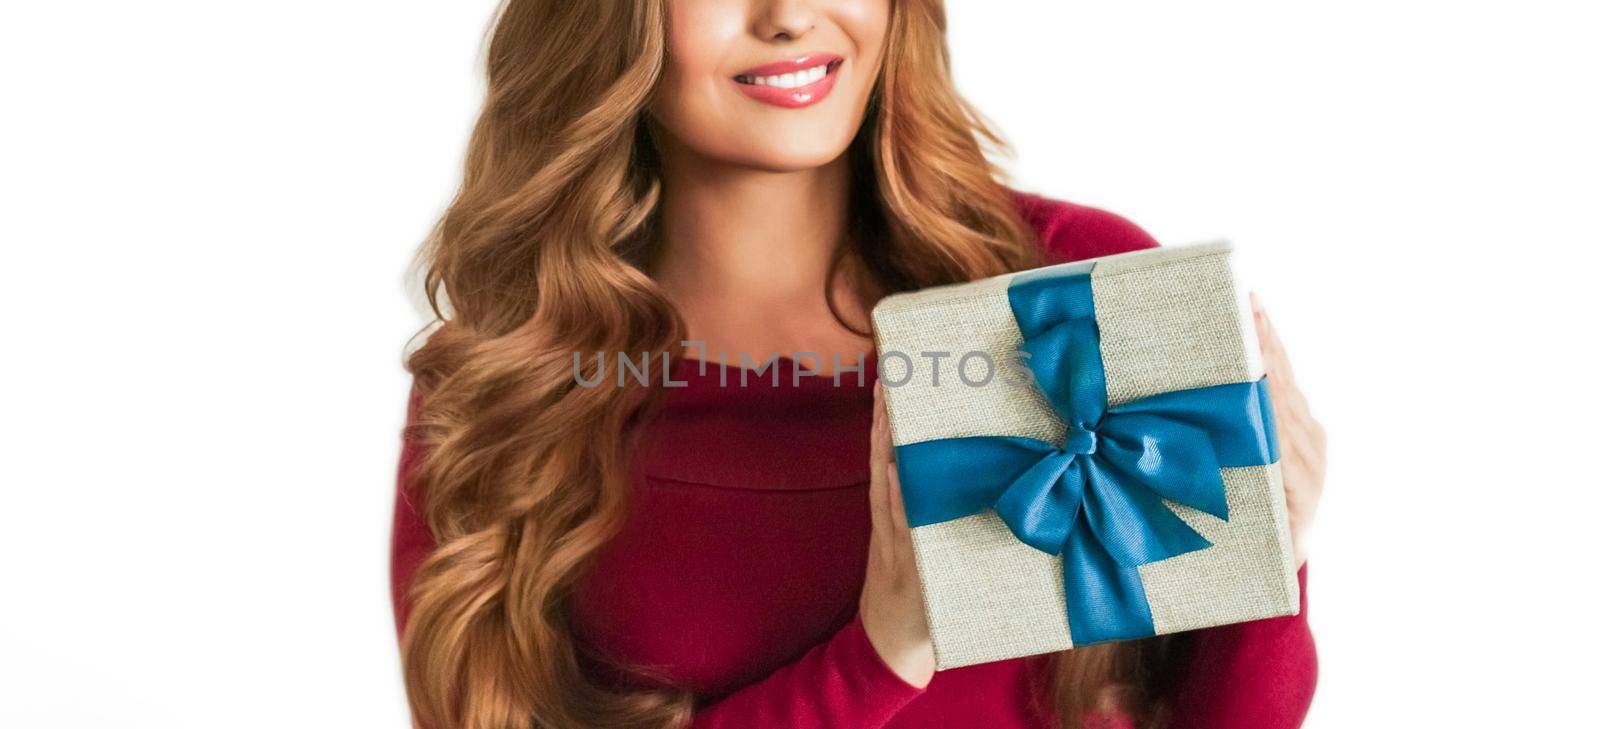 Birthday, Christmas or holiday present, happy woman holding a green gift or luxury beauty box subscription delivery isolated on white background by Anneleven